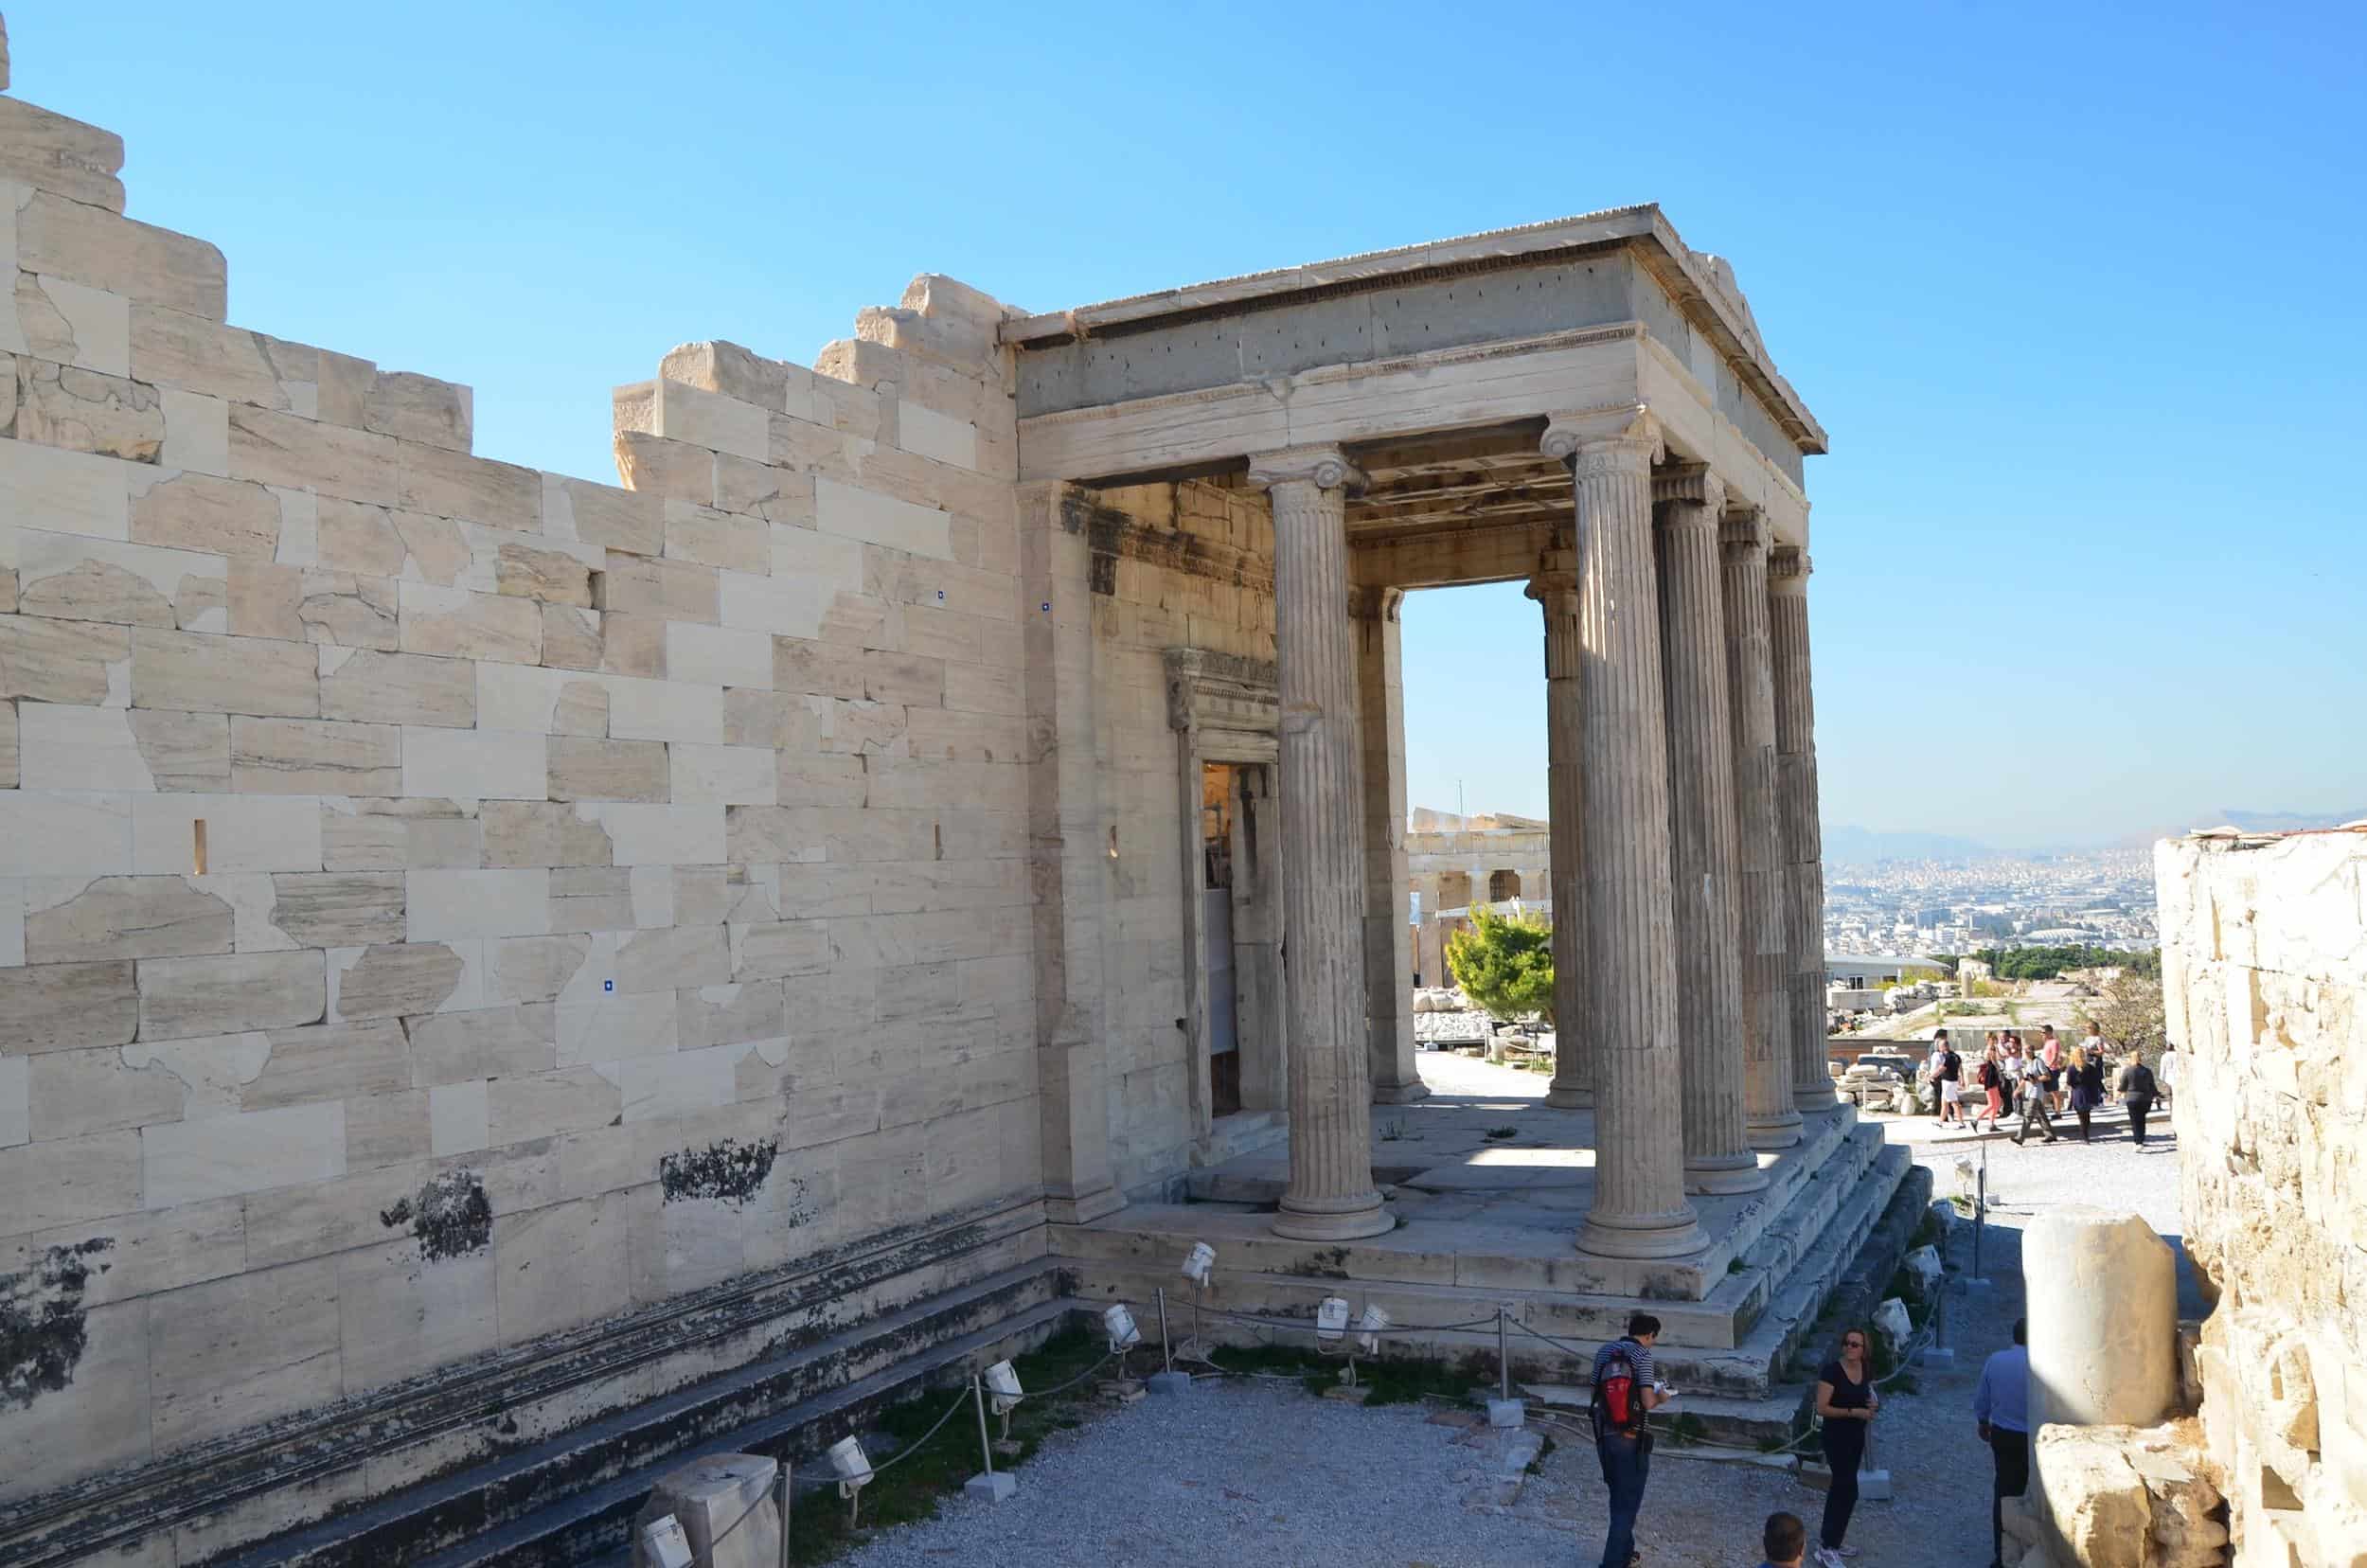 North side of the Erechtheion